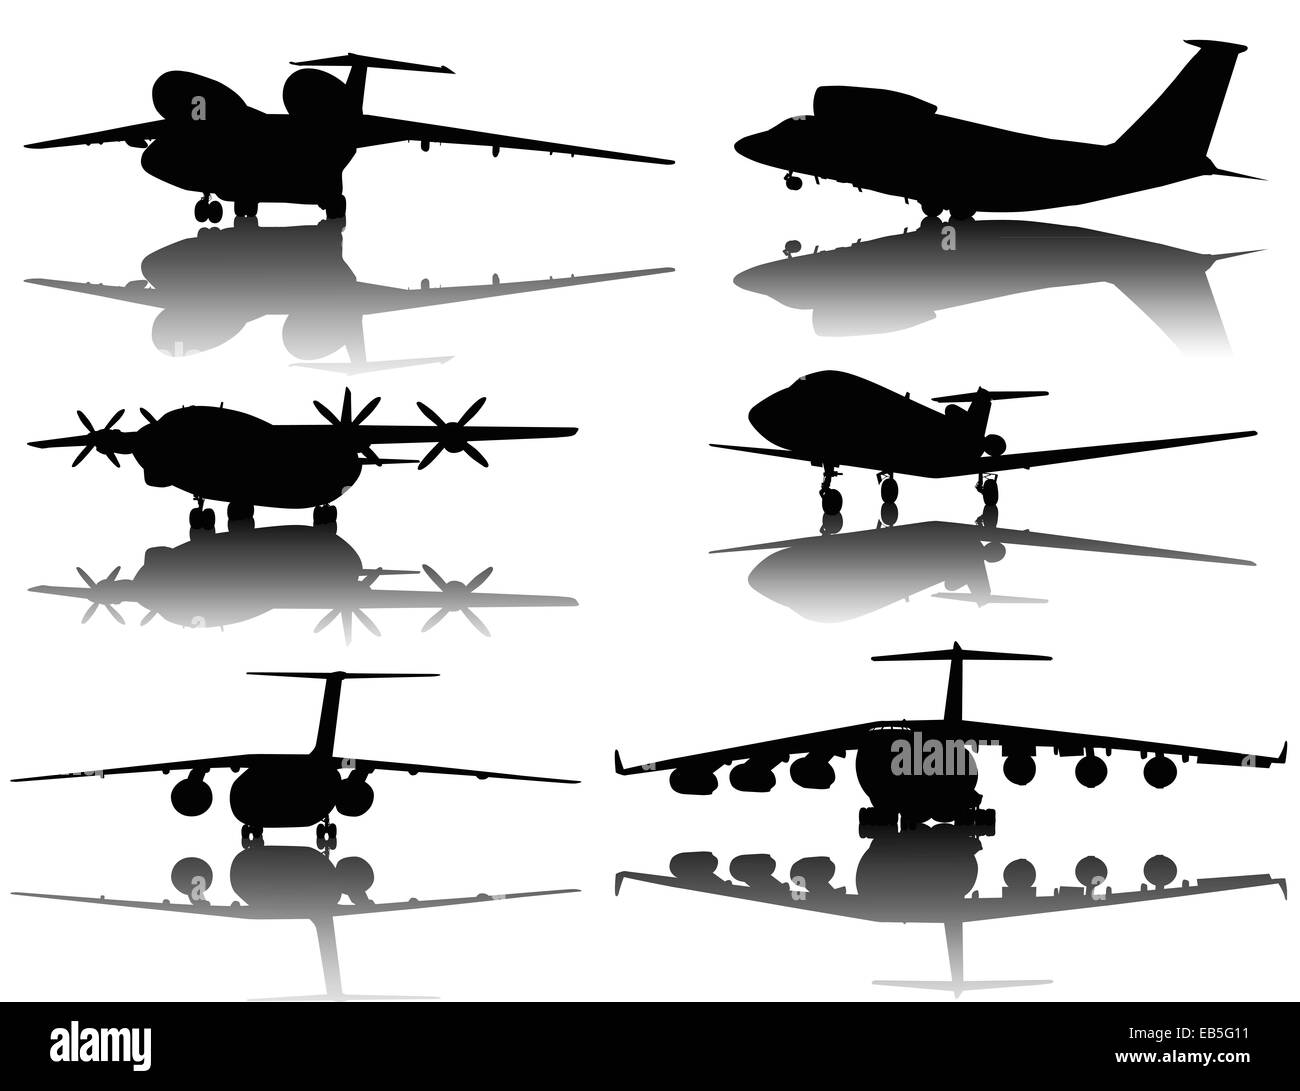 Aircrafts silhouettes Stock Photo